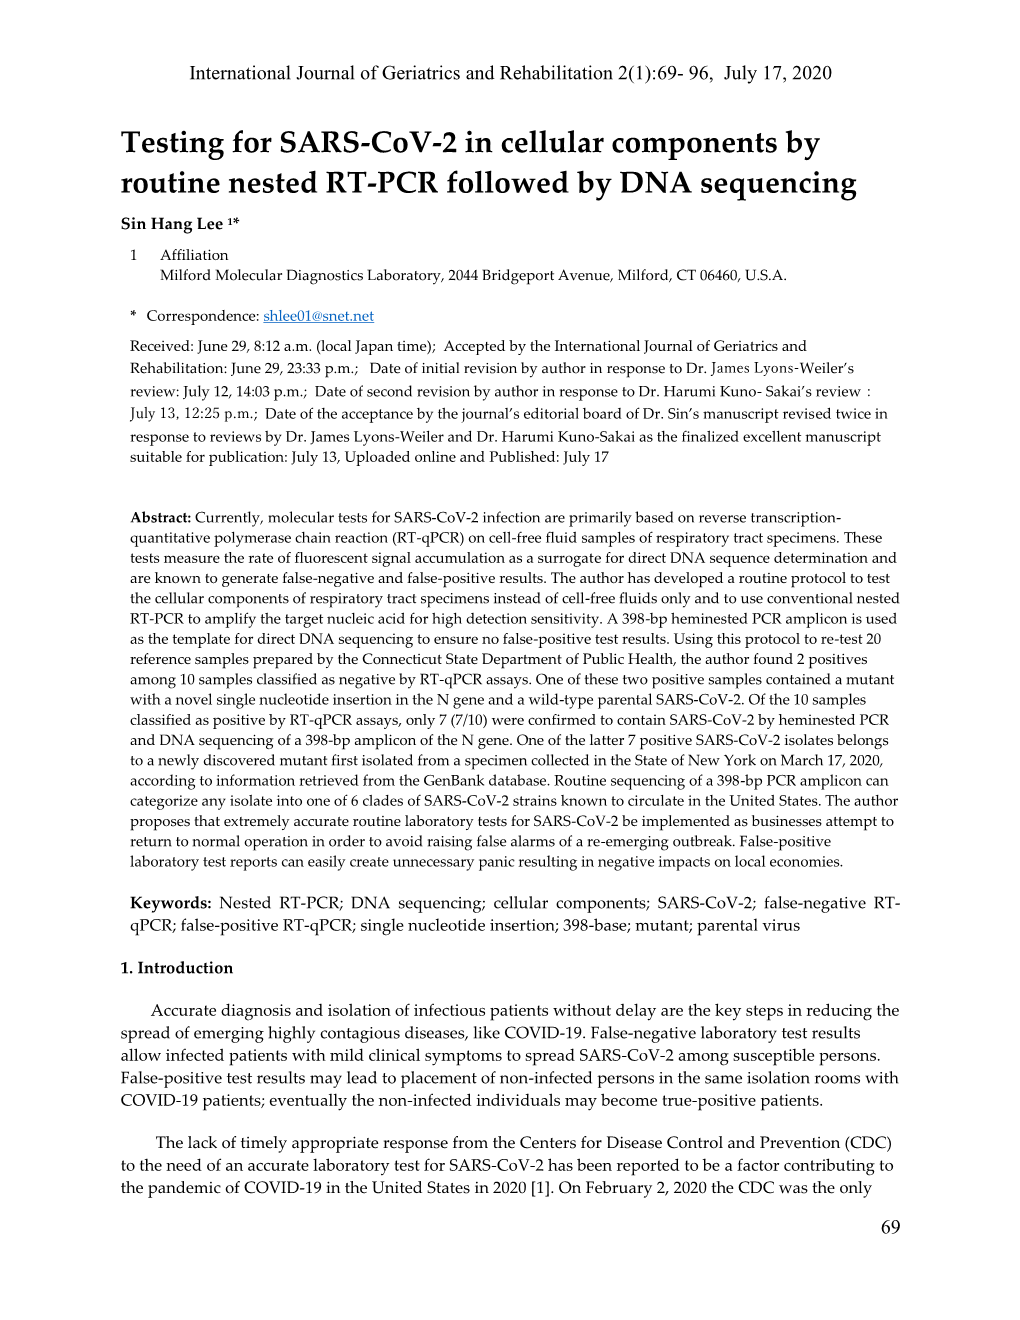 Testing for SARS-Cov-2 in Cellular Components by Routine Nested RT-PCR Followed by DNA Sequencing